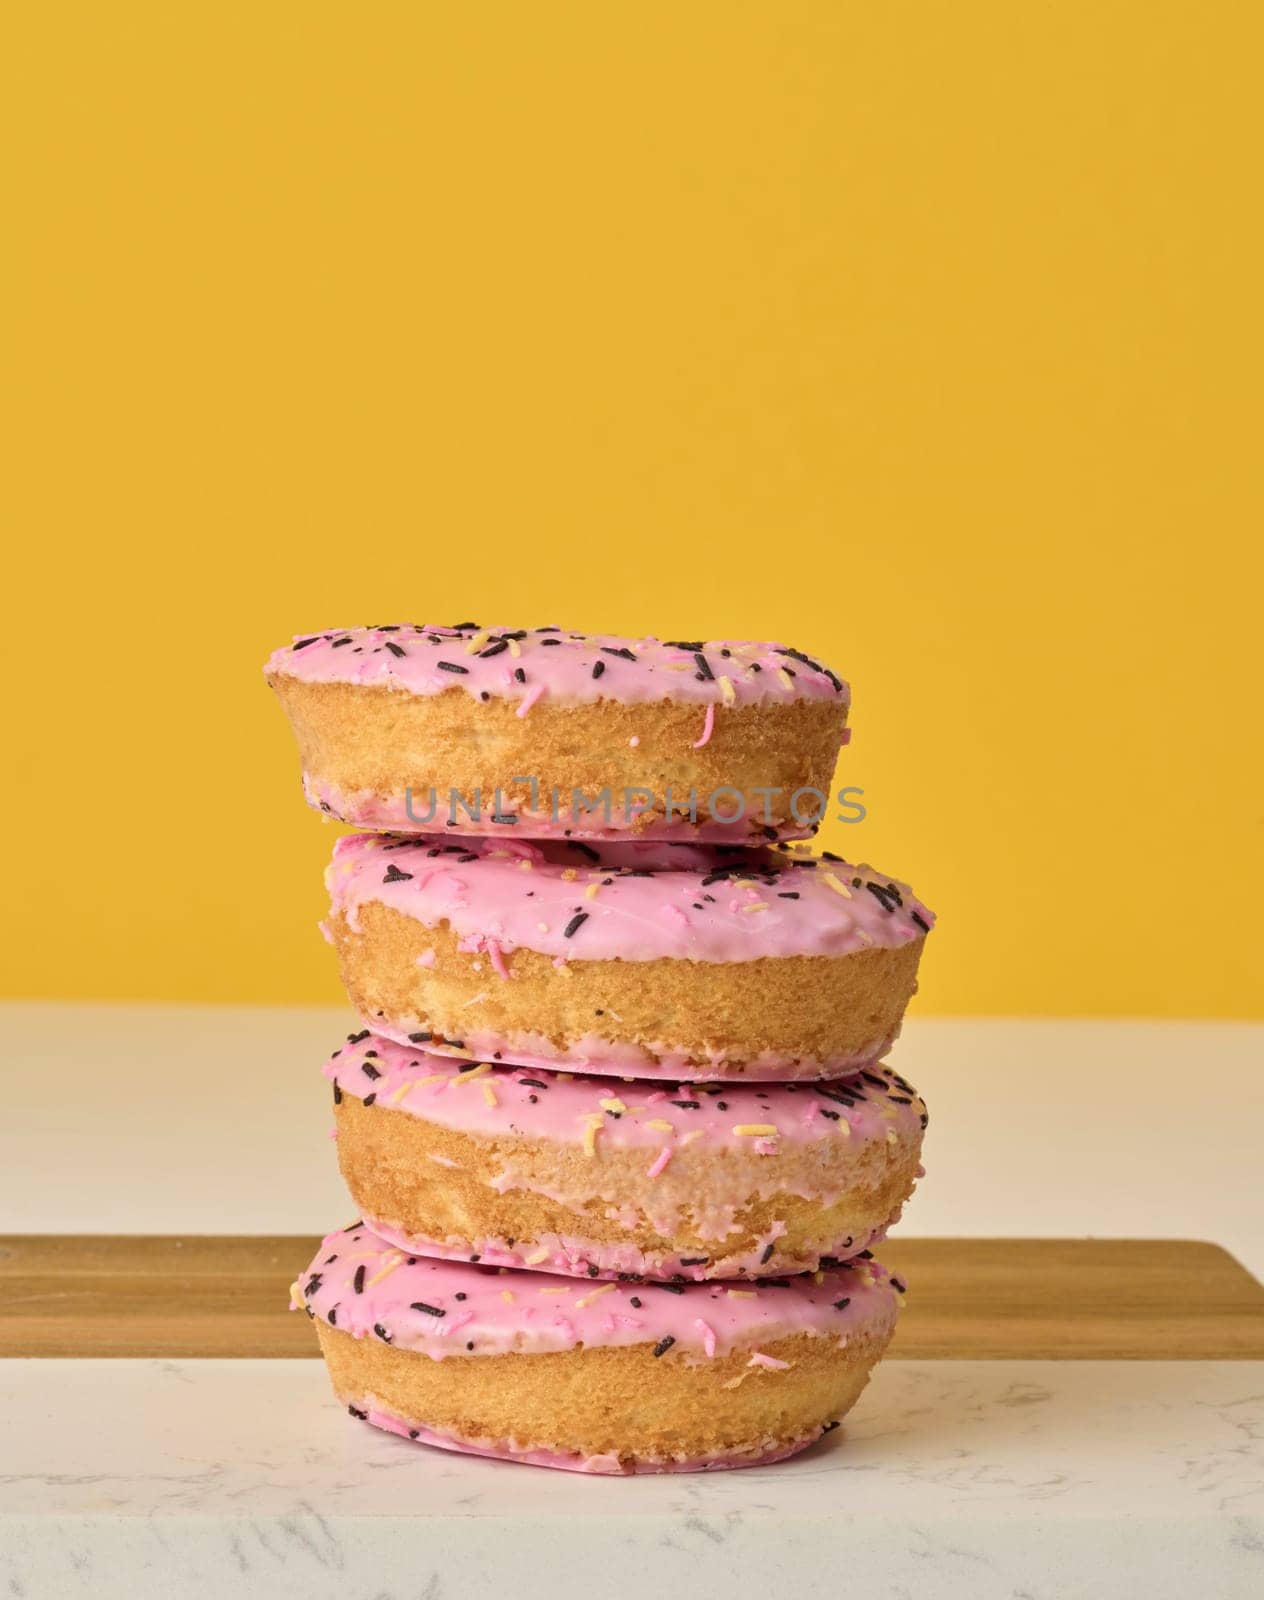 Donut covered with pink glaze and sprinkled with colorful sprinkles, yellow background